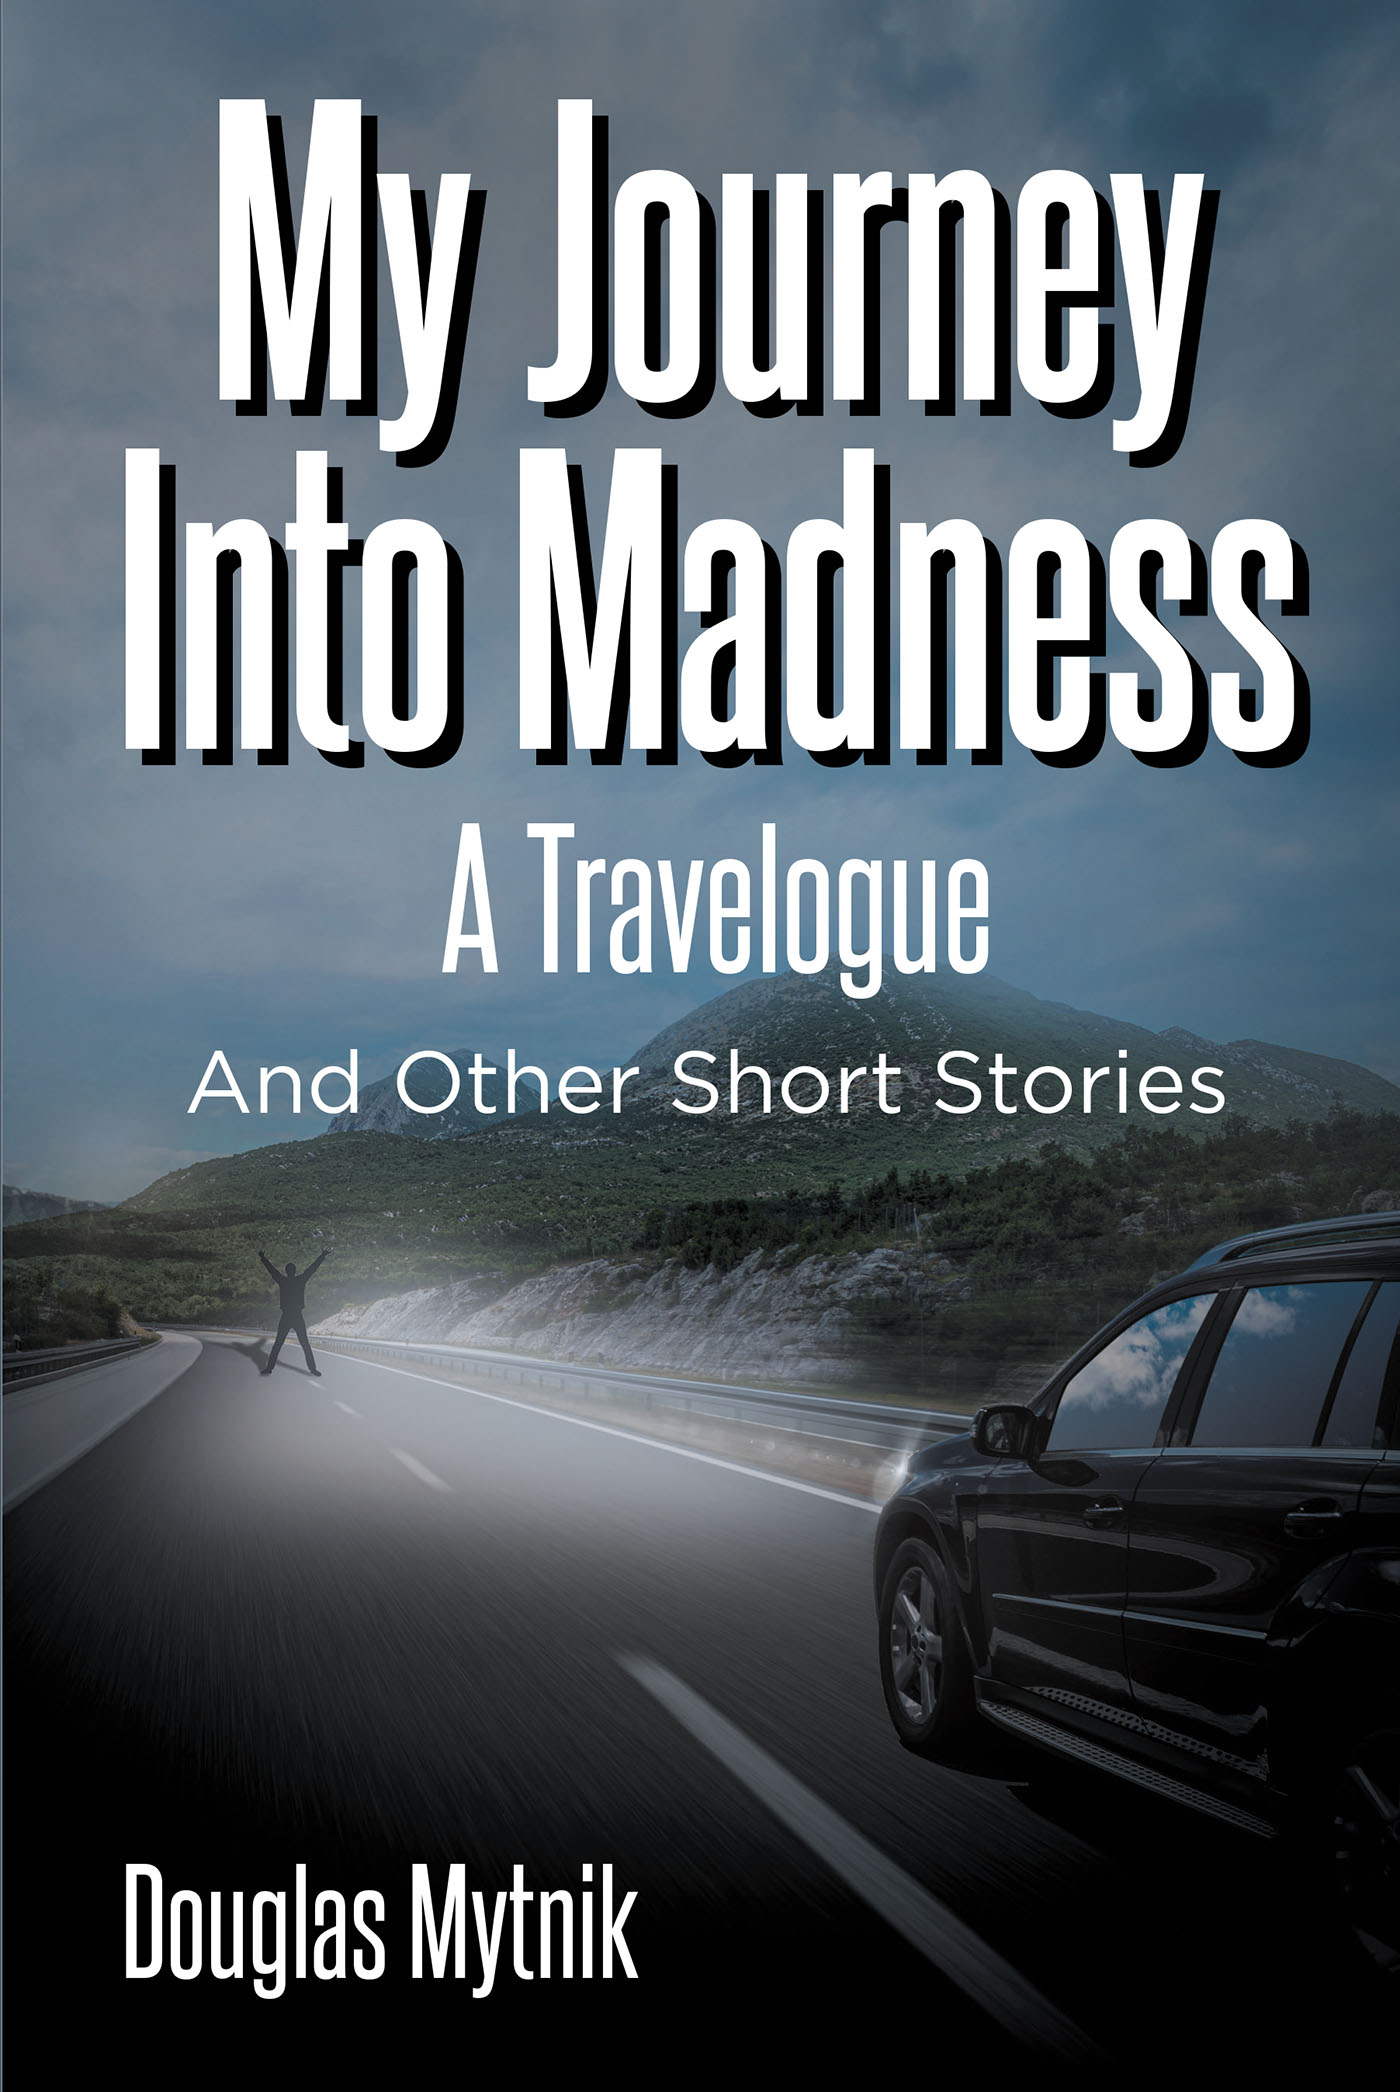 Author Douglas Mytnik’s New Book, “My Journey Into Madness: A Travelogue and Other Short Stories,” Follows One Man’s Quest to Find His Life’s Purpose